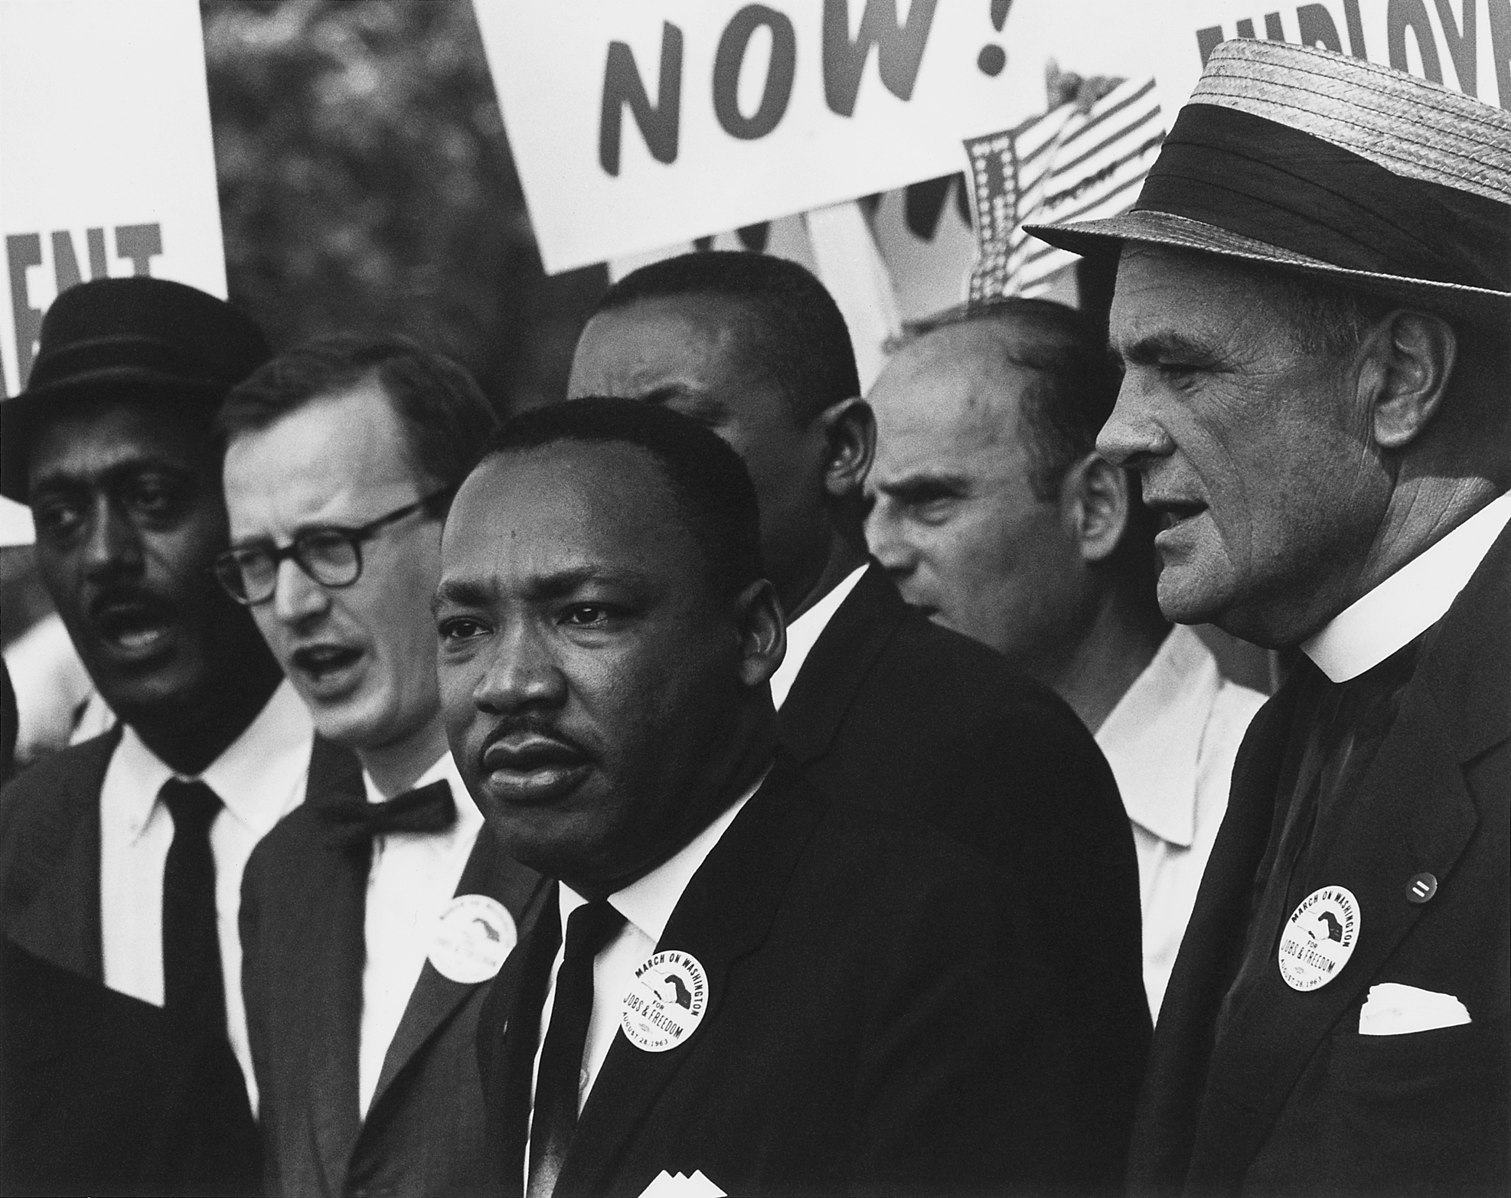 1511px-Civil_Rights_March_on_Washington,_D.C._(Dr._Martin_Luther_King,_Jr._and_Mathew_Ahmann_in_a_crowd.)_-_NARA_-_542015_-_Restoration